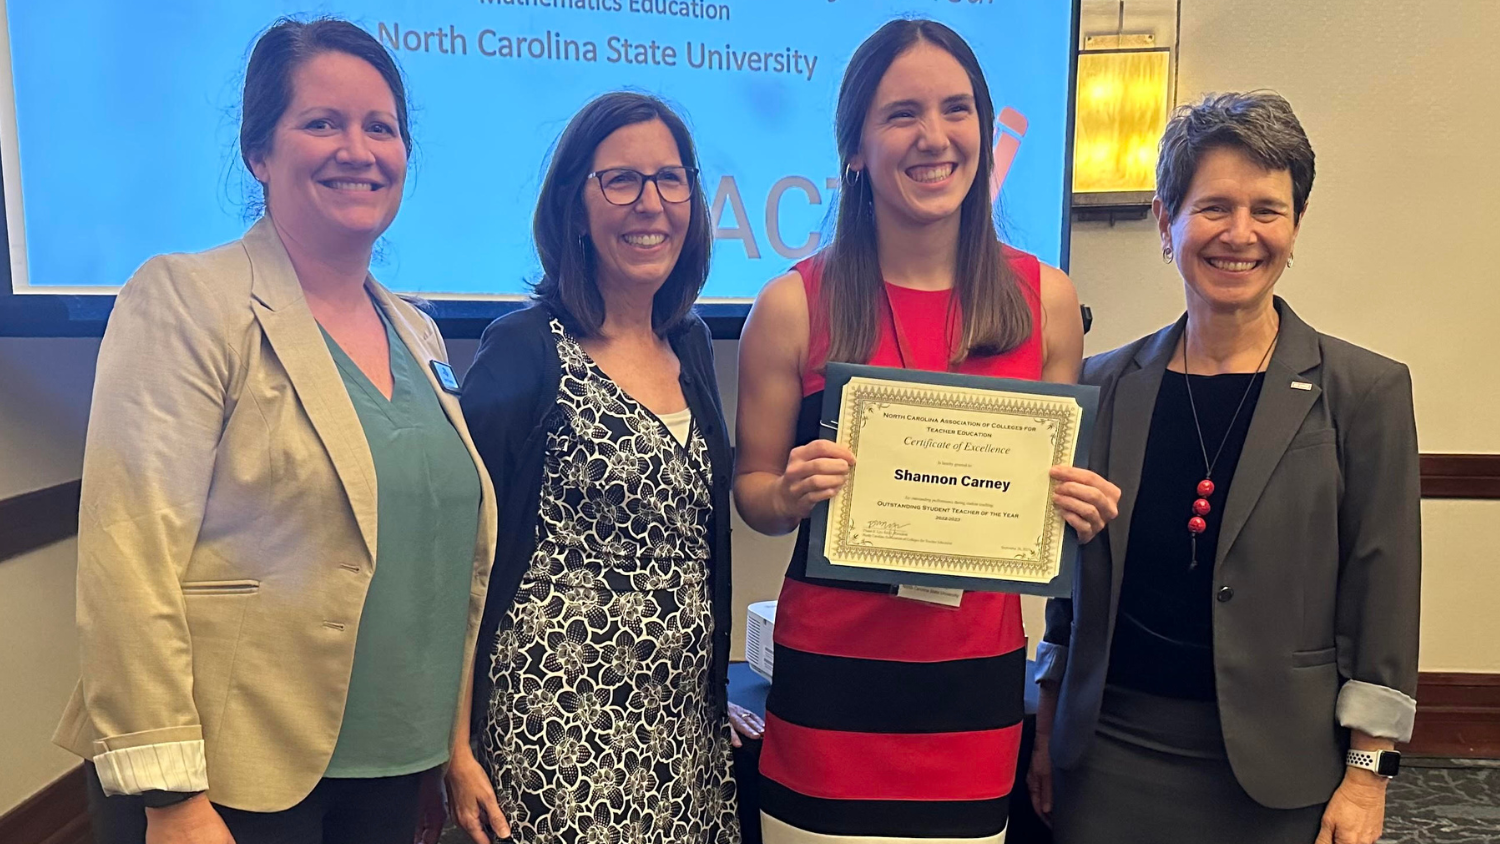 Shannon Carney receiving the 2023 North Carolina Association of Colleges for Teacher Education Student Teacher of the Year Award.